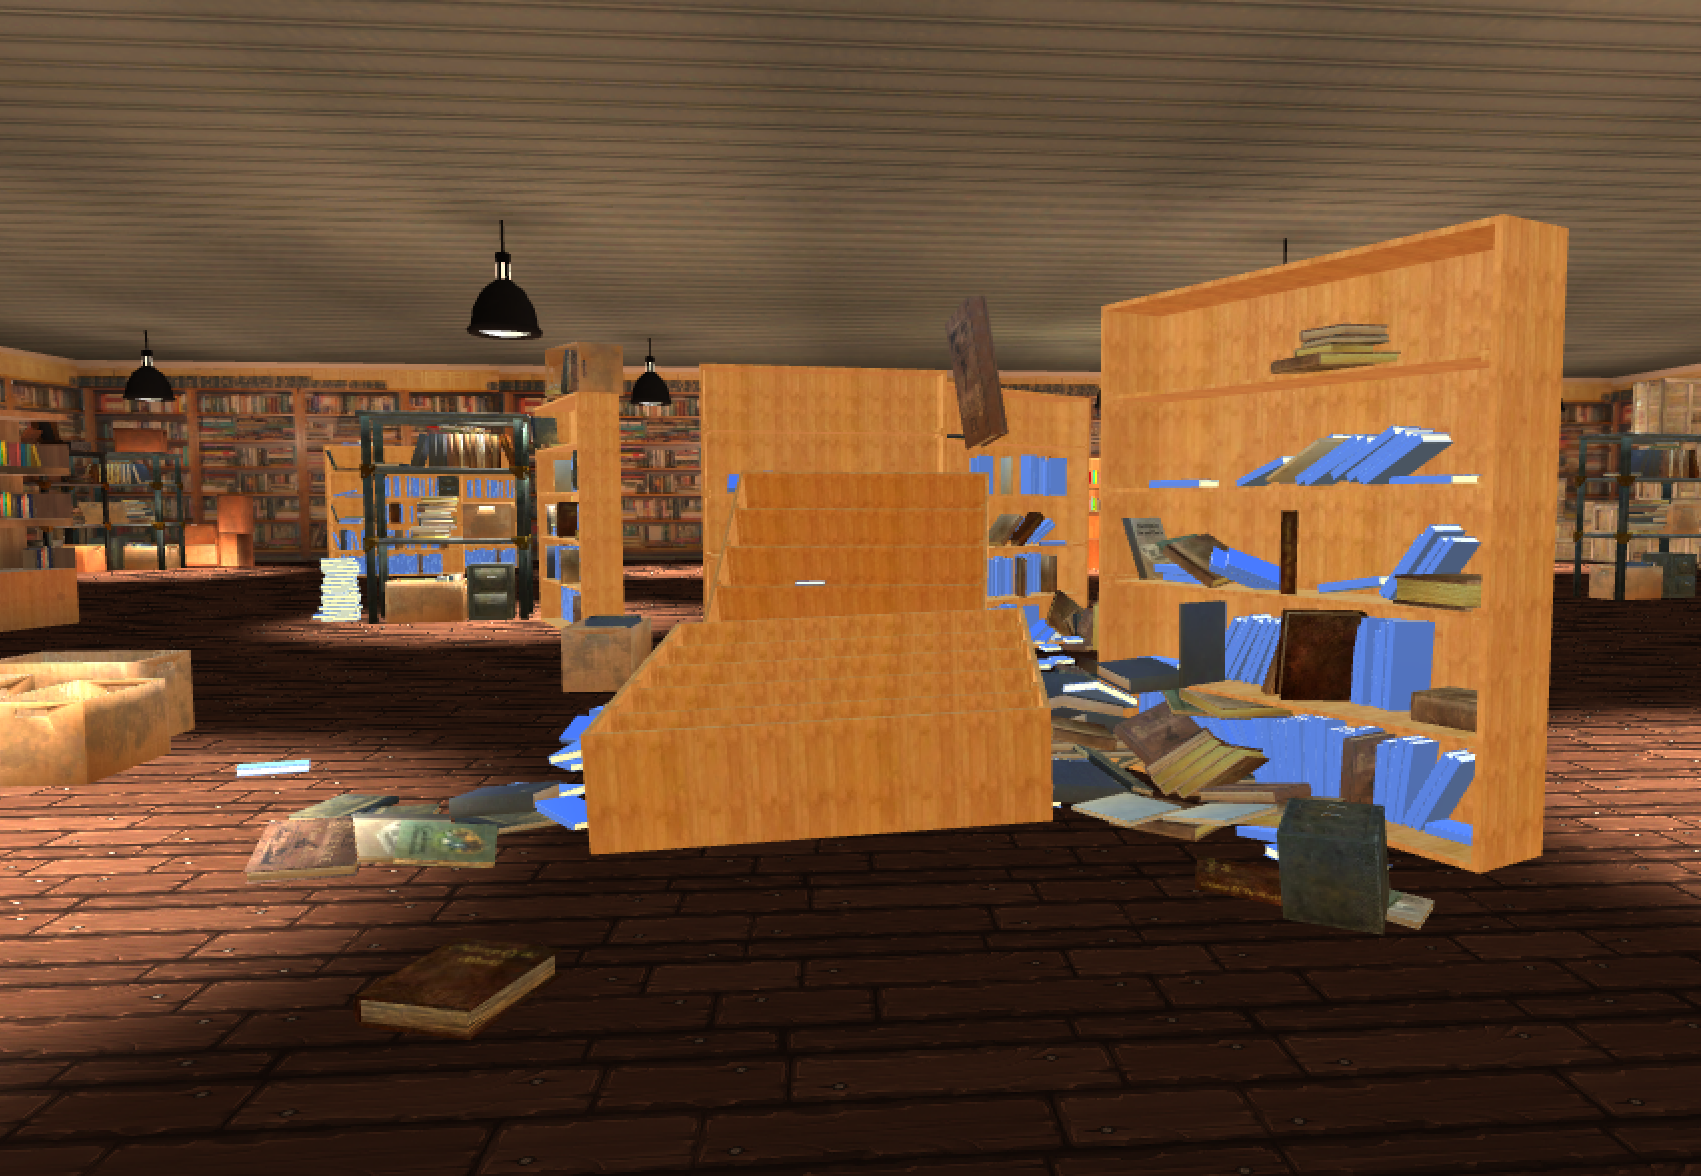 A Virtual Reality experience in an abandoned library where you explore, knock over shelves and throw books around, all operated with a real book.